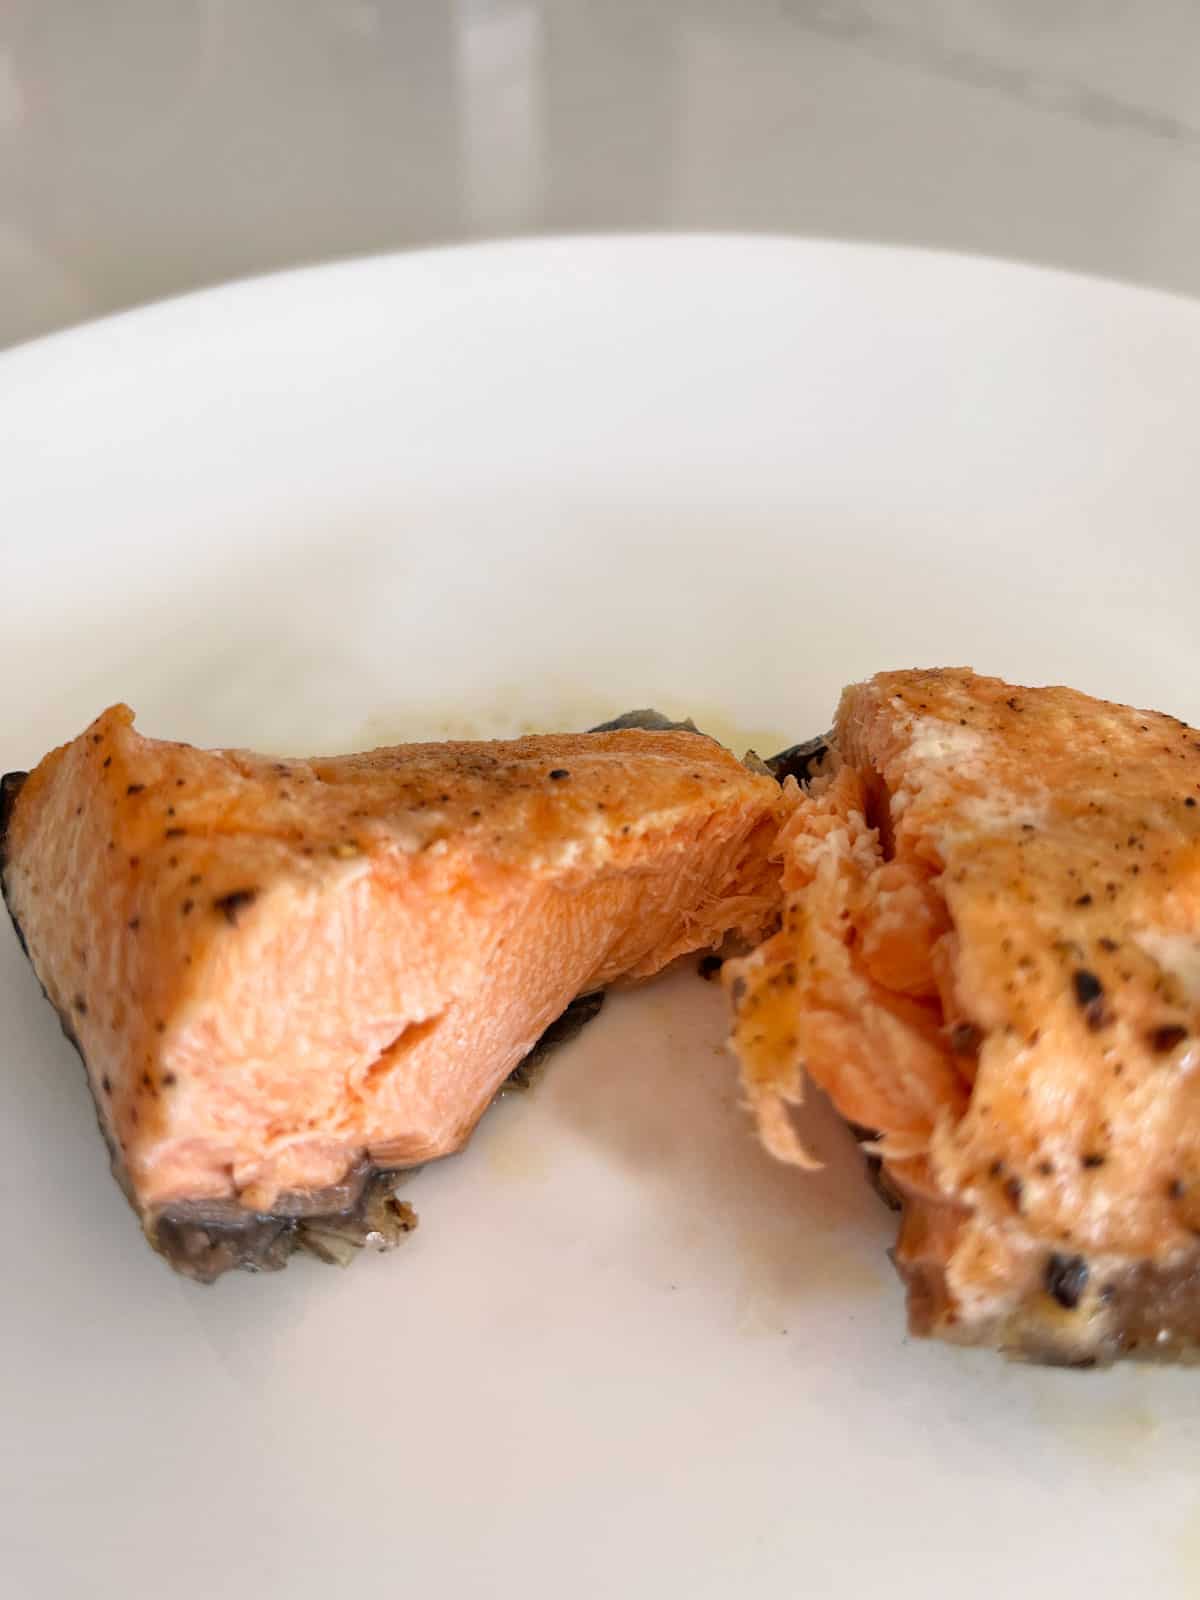 The inside of the overcooked salmon fillet appears dry. 